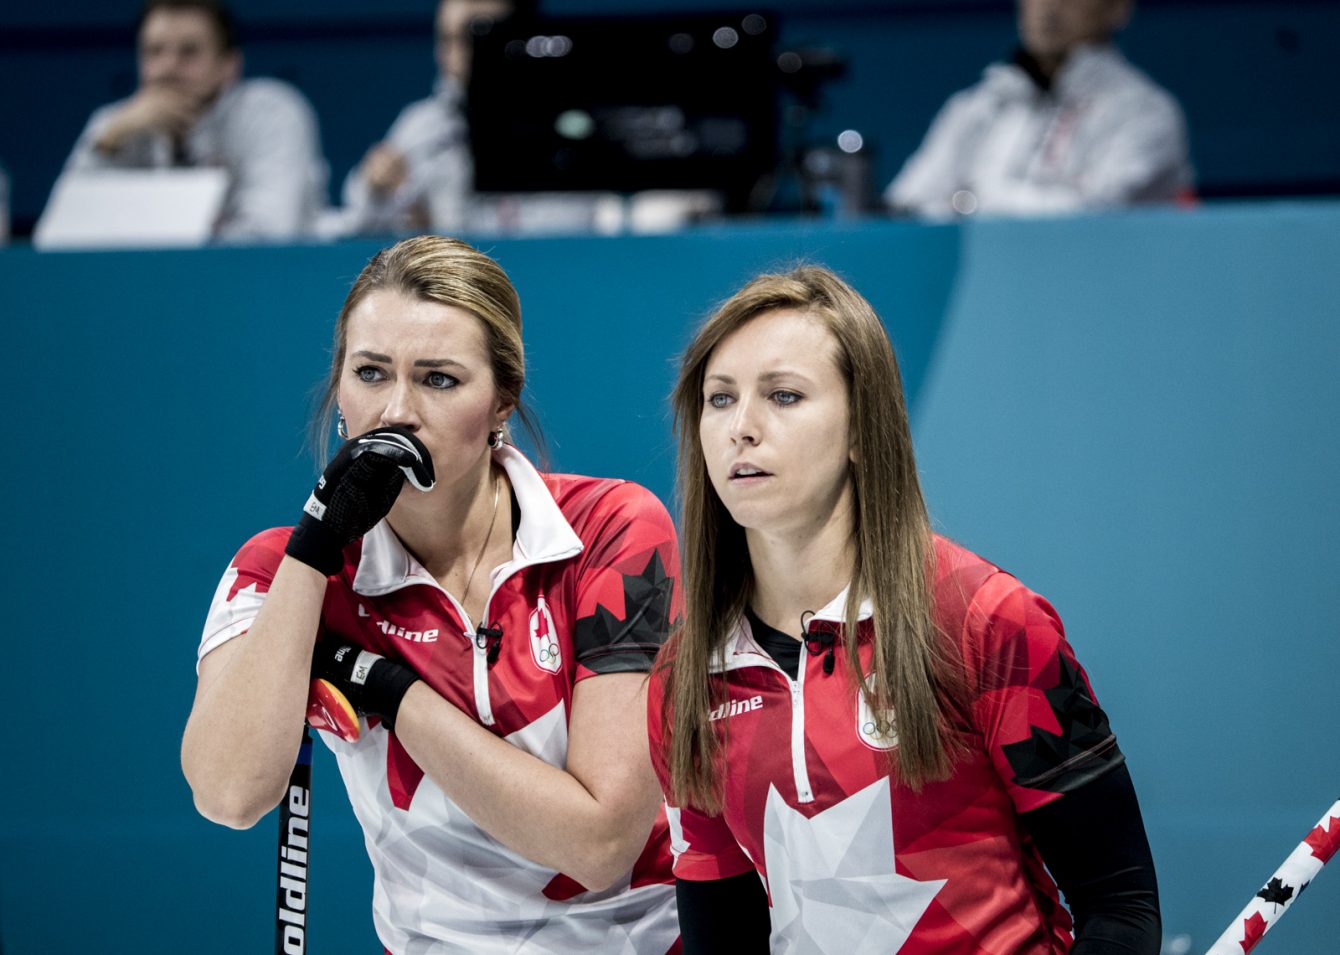 Shooting and sweeping towards Beijing 2022 What to watch in curling and hockey - Team Canada